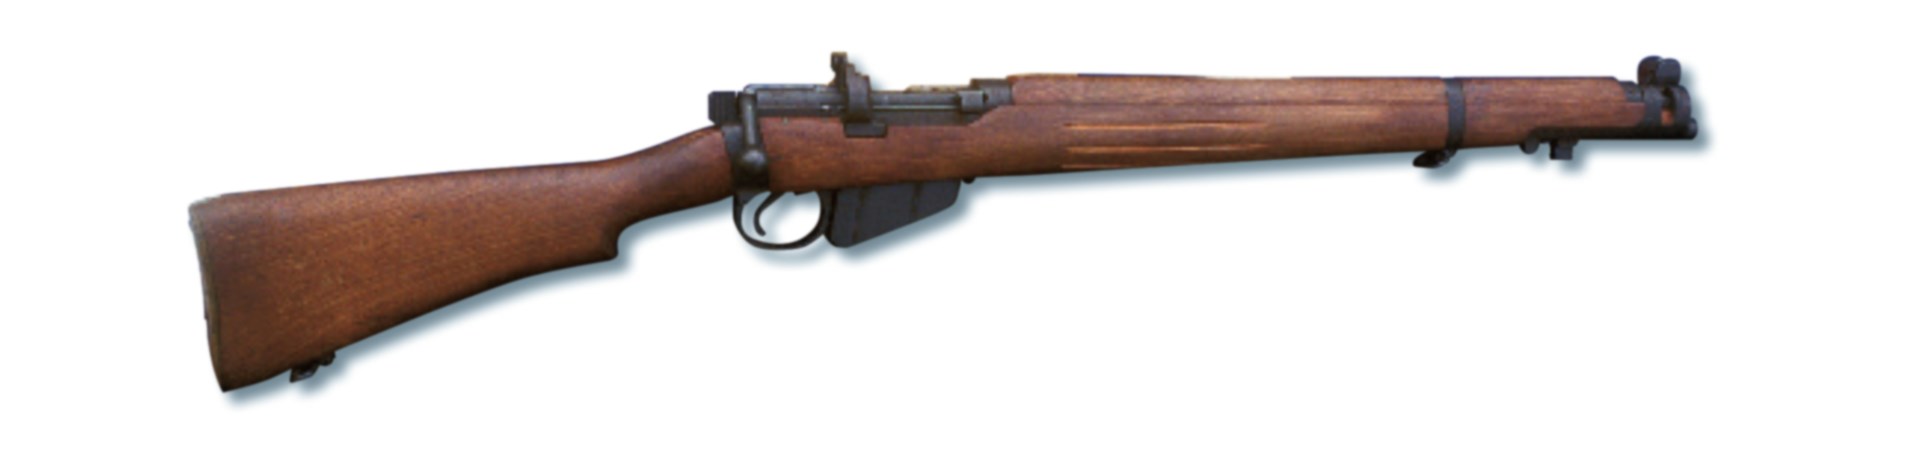 No. 1, Mk. III* “intermediate length shortened and lightened” rifle, serial number XP23